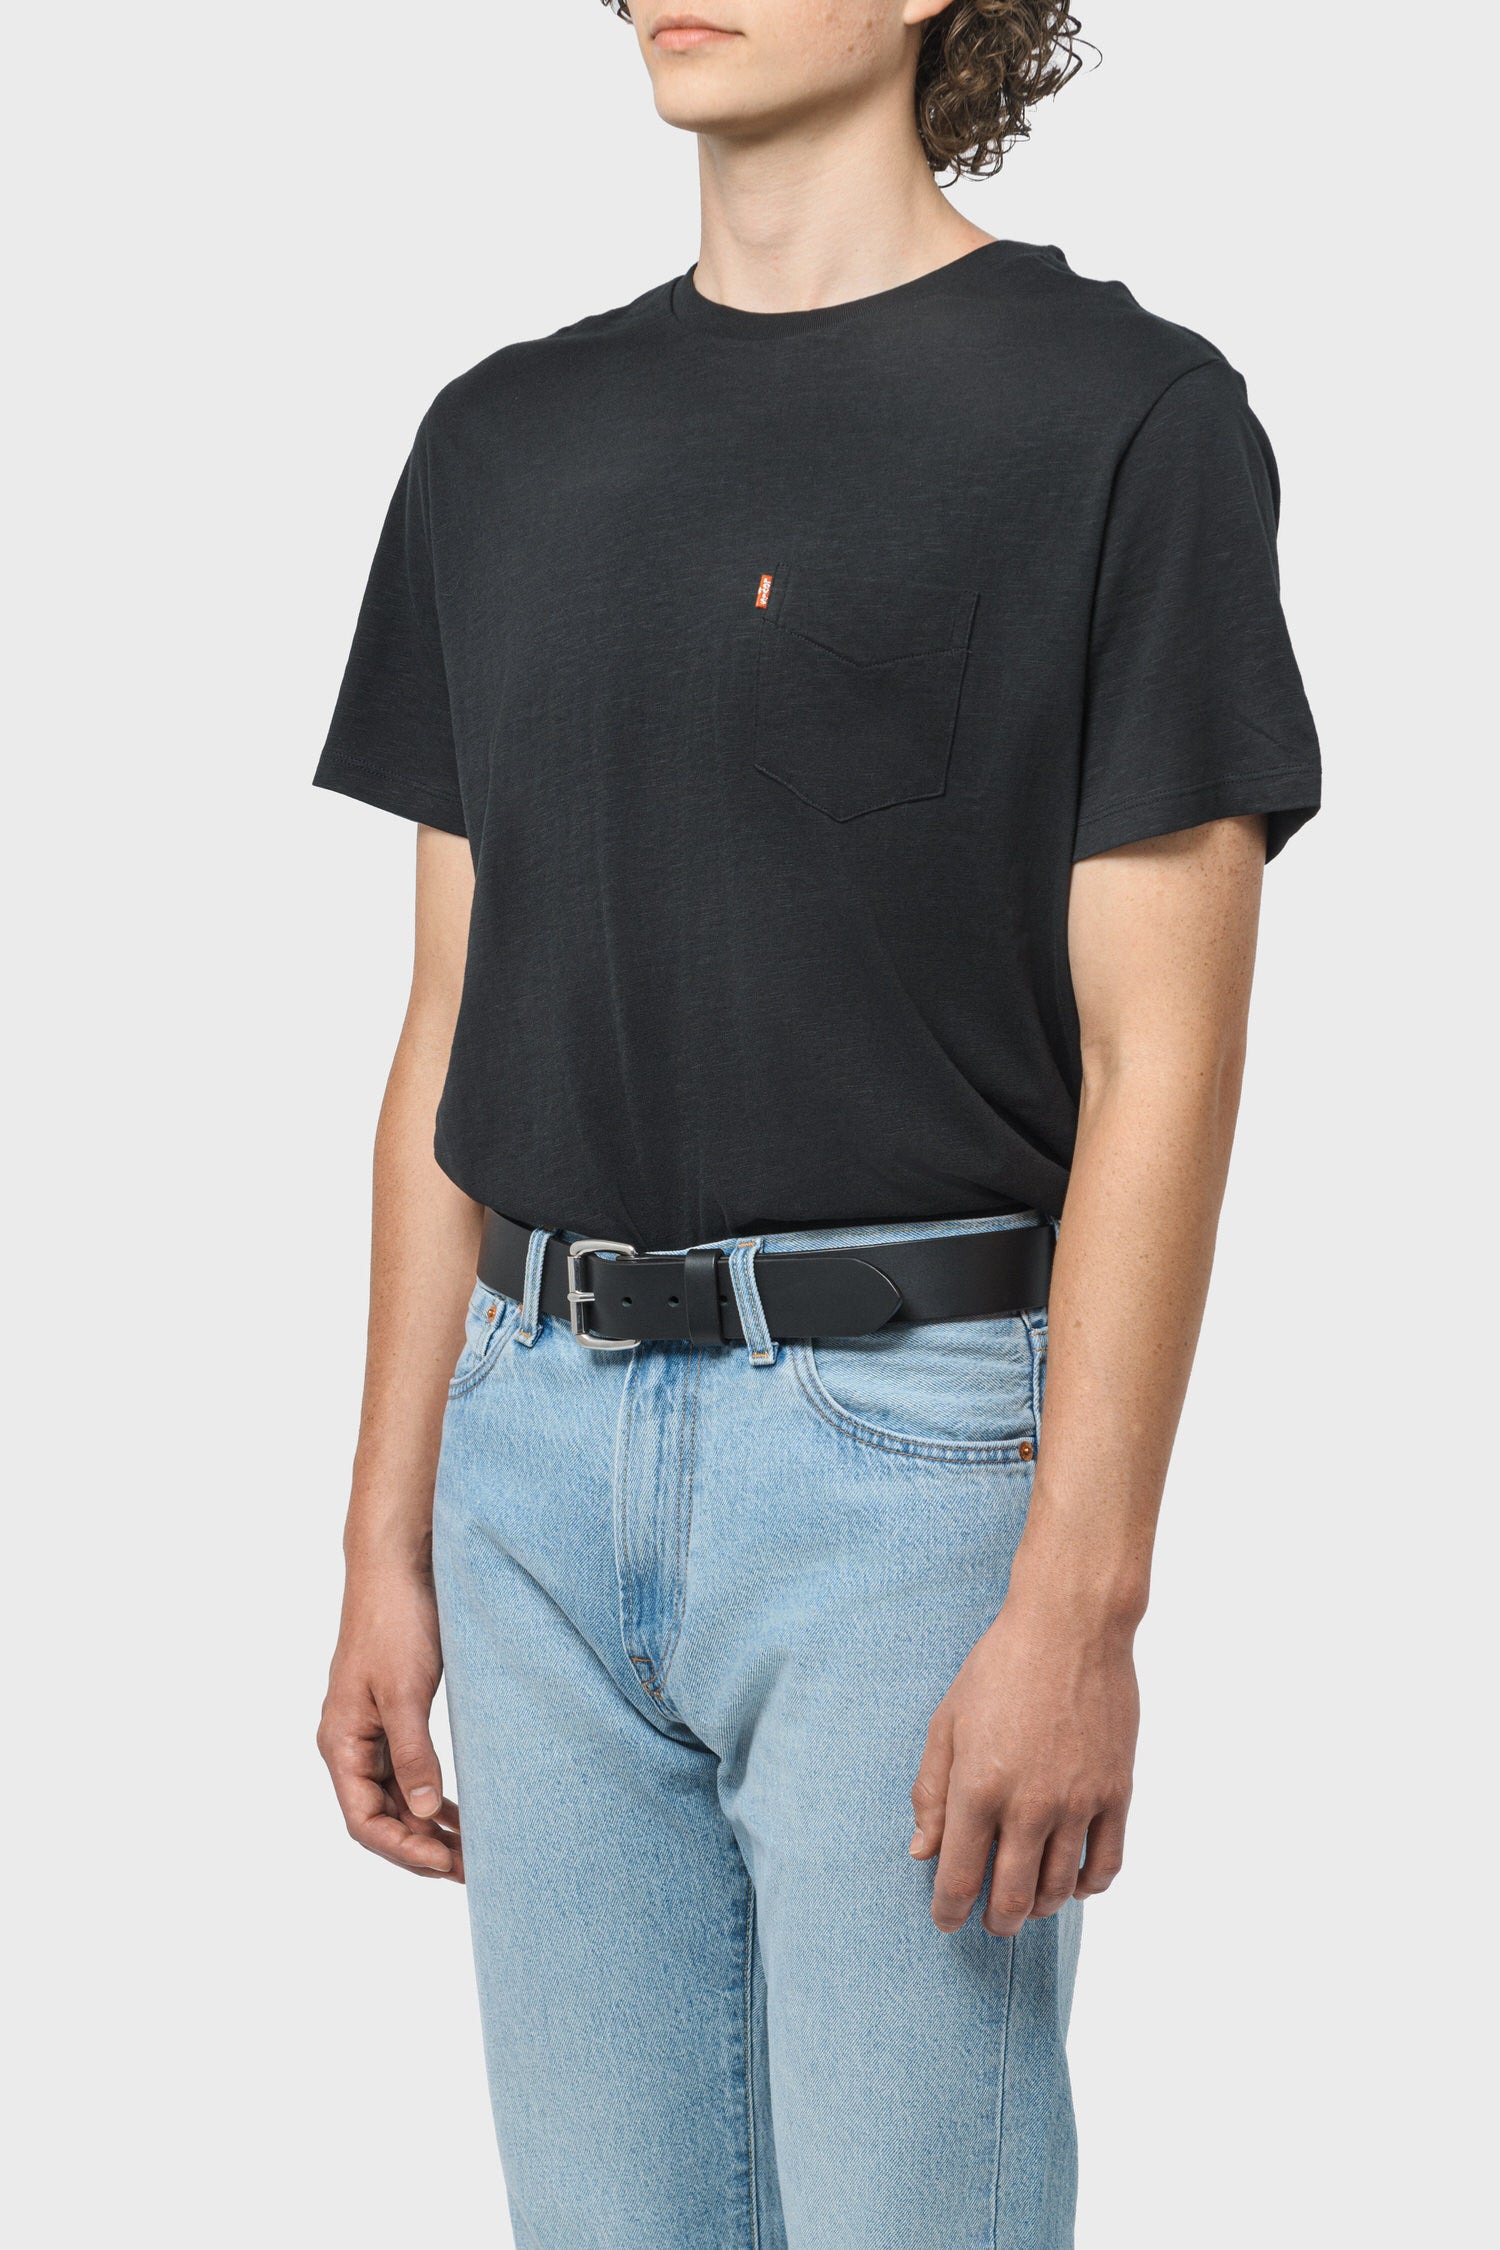 Men's Levi's SS Classic Pocket Tee in Mineral Black